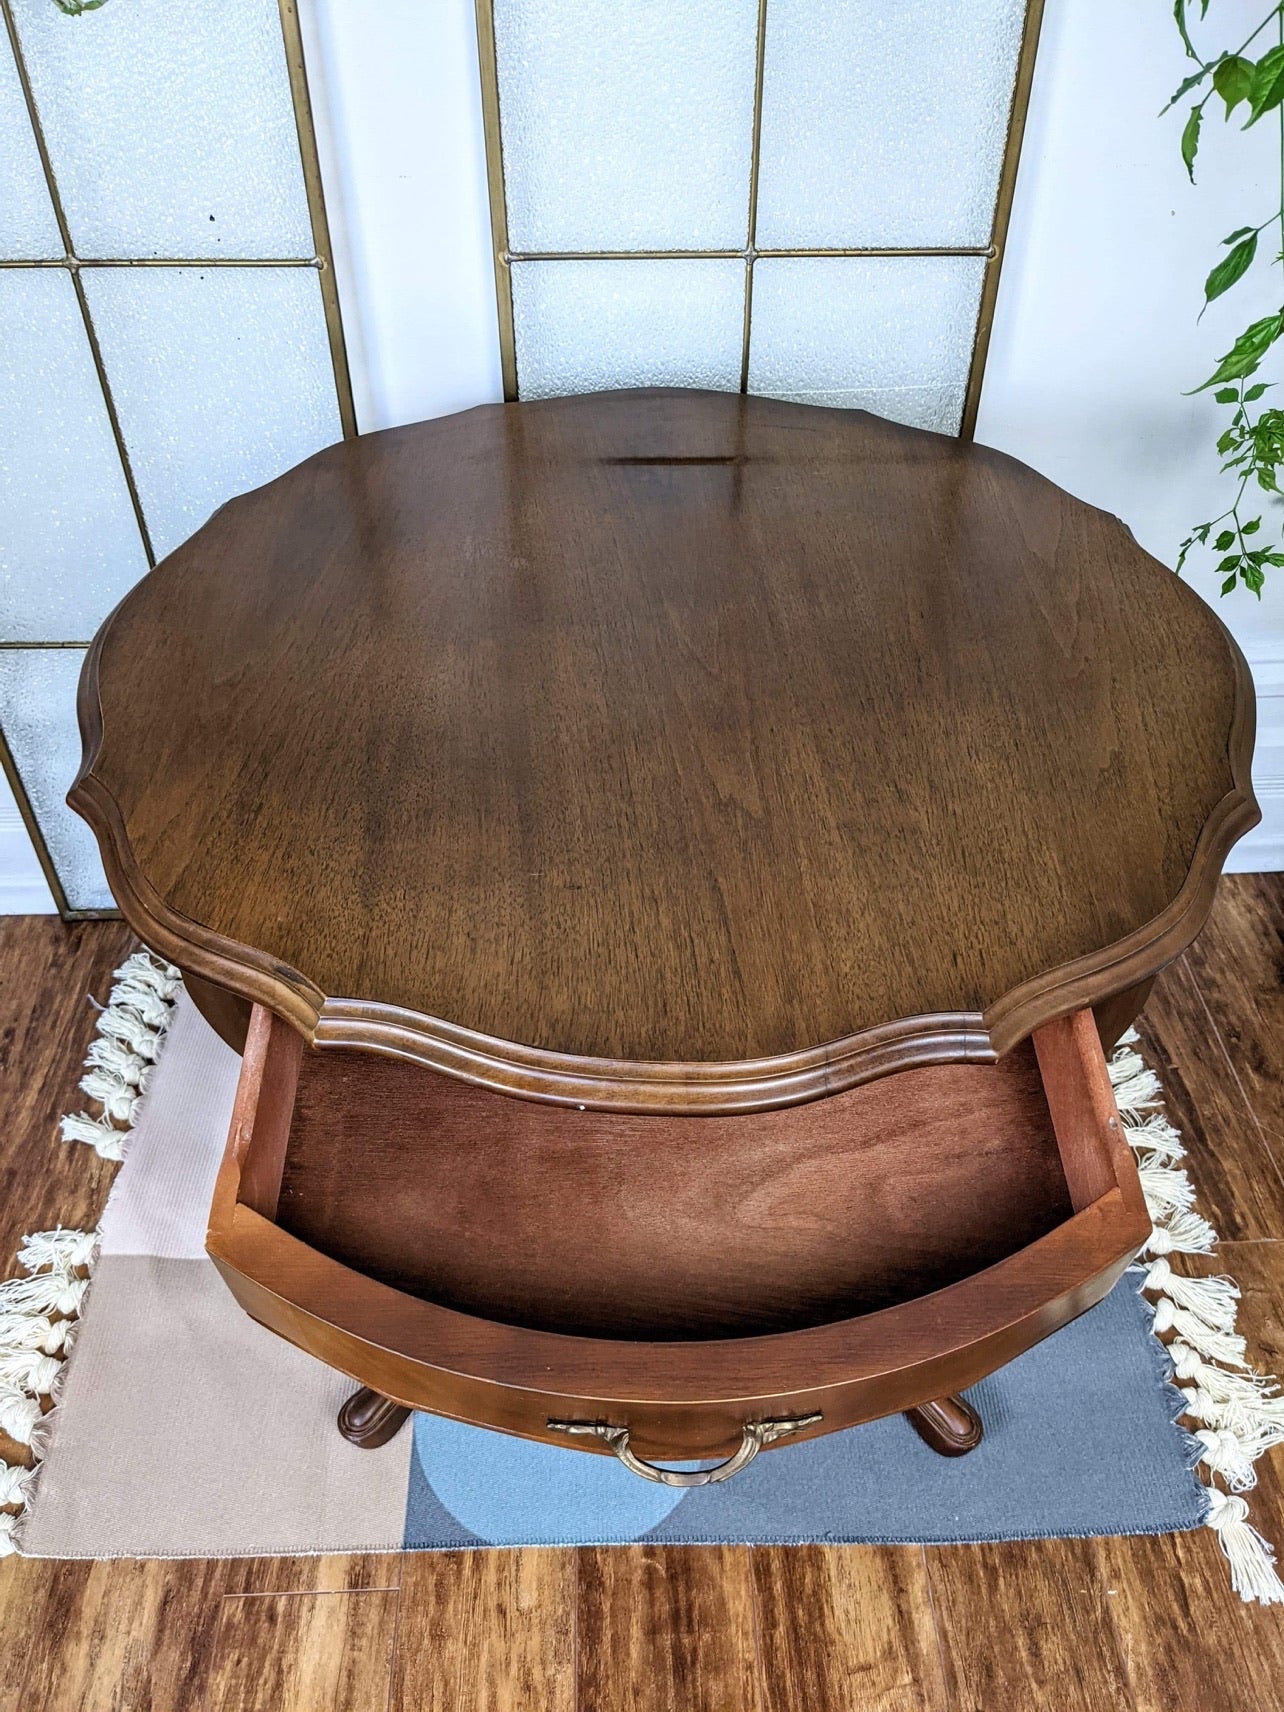 The Round Robin Table